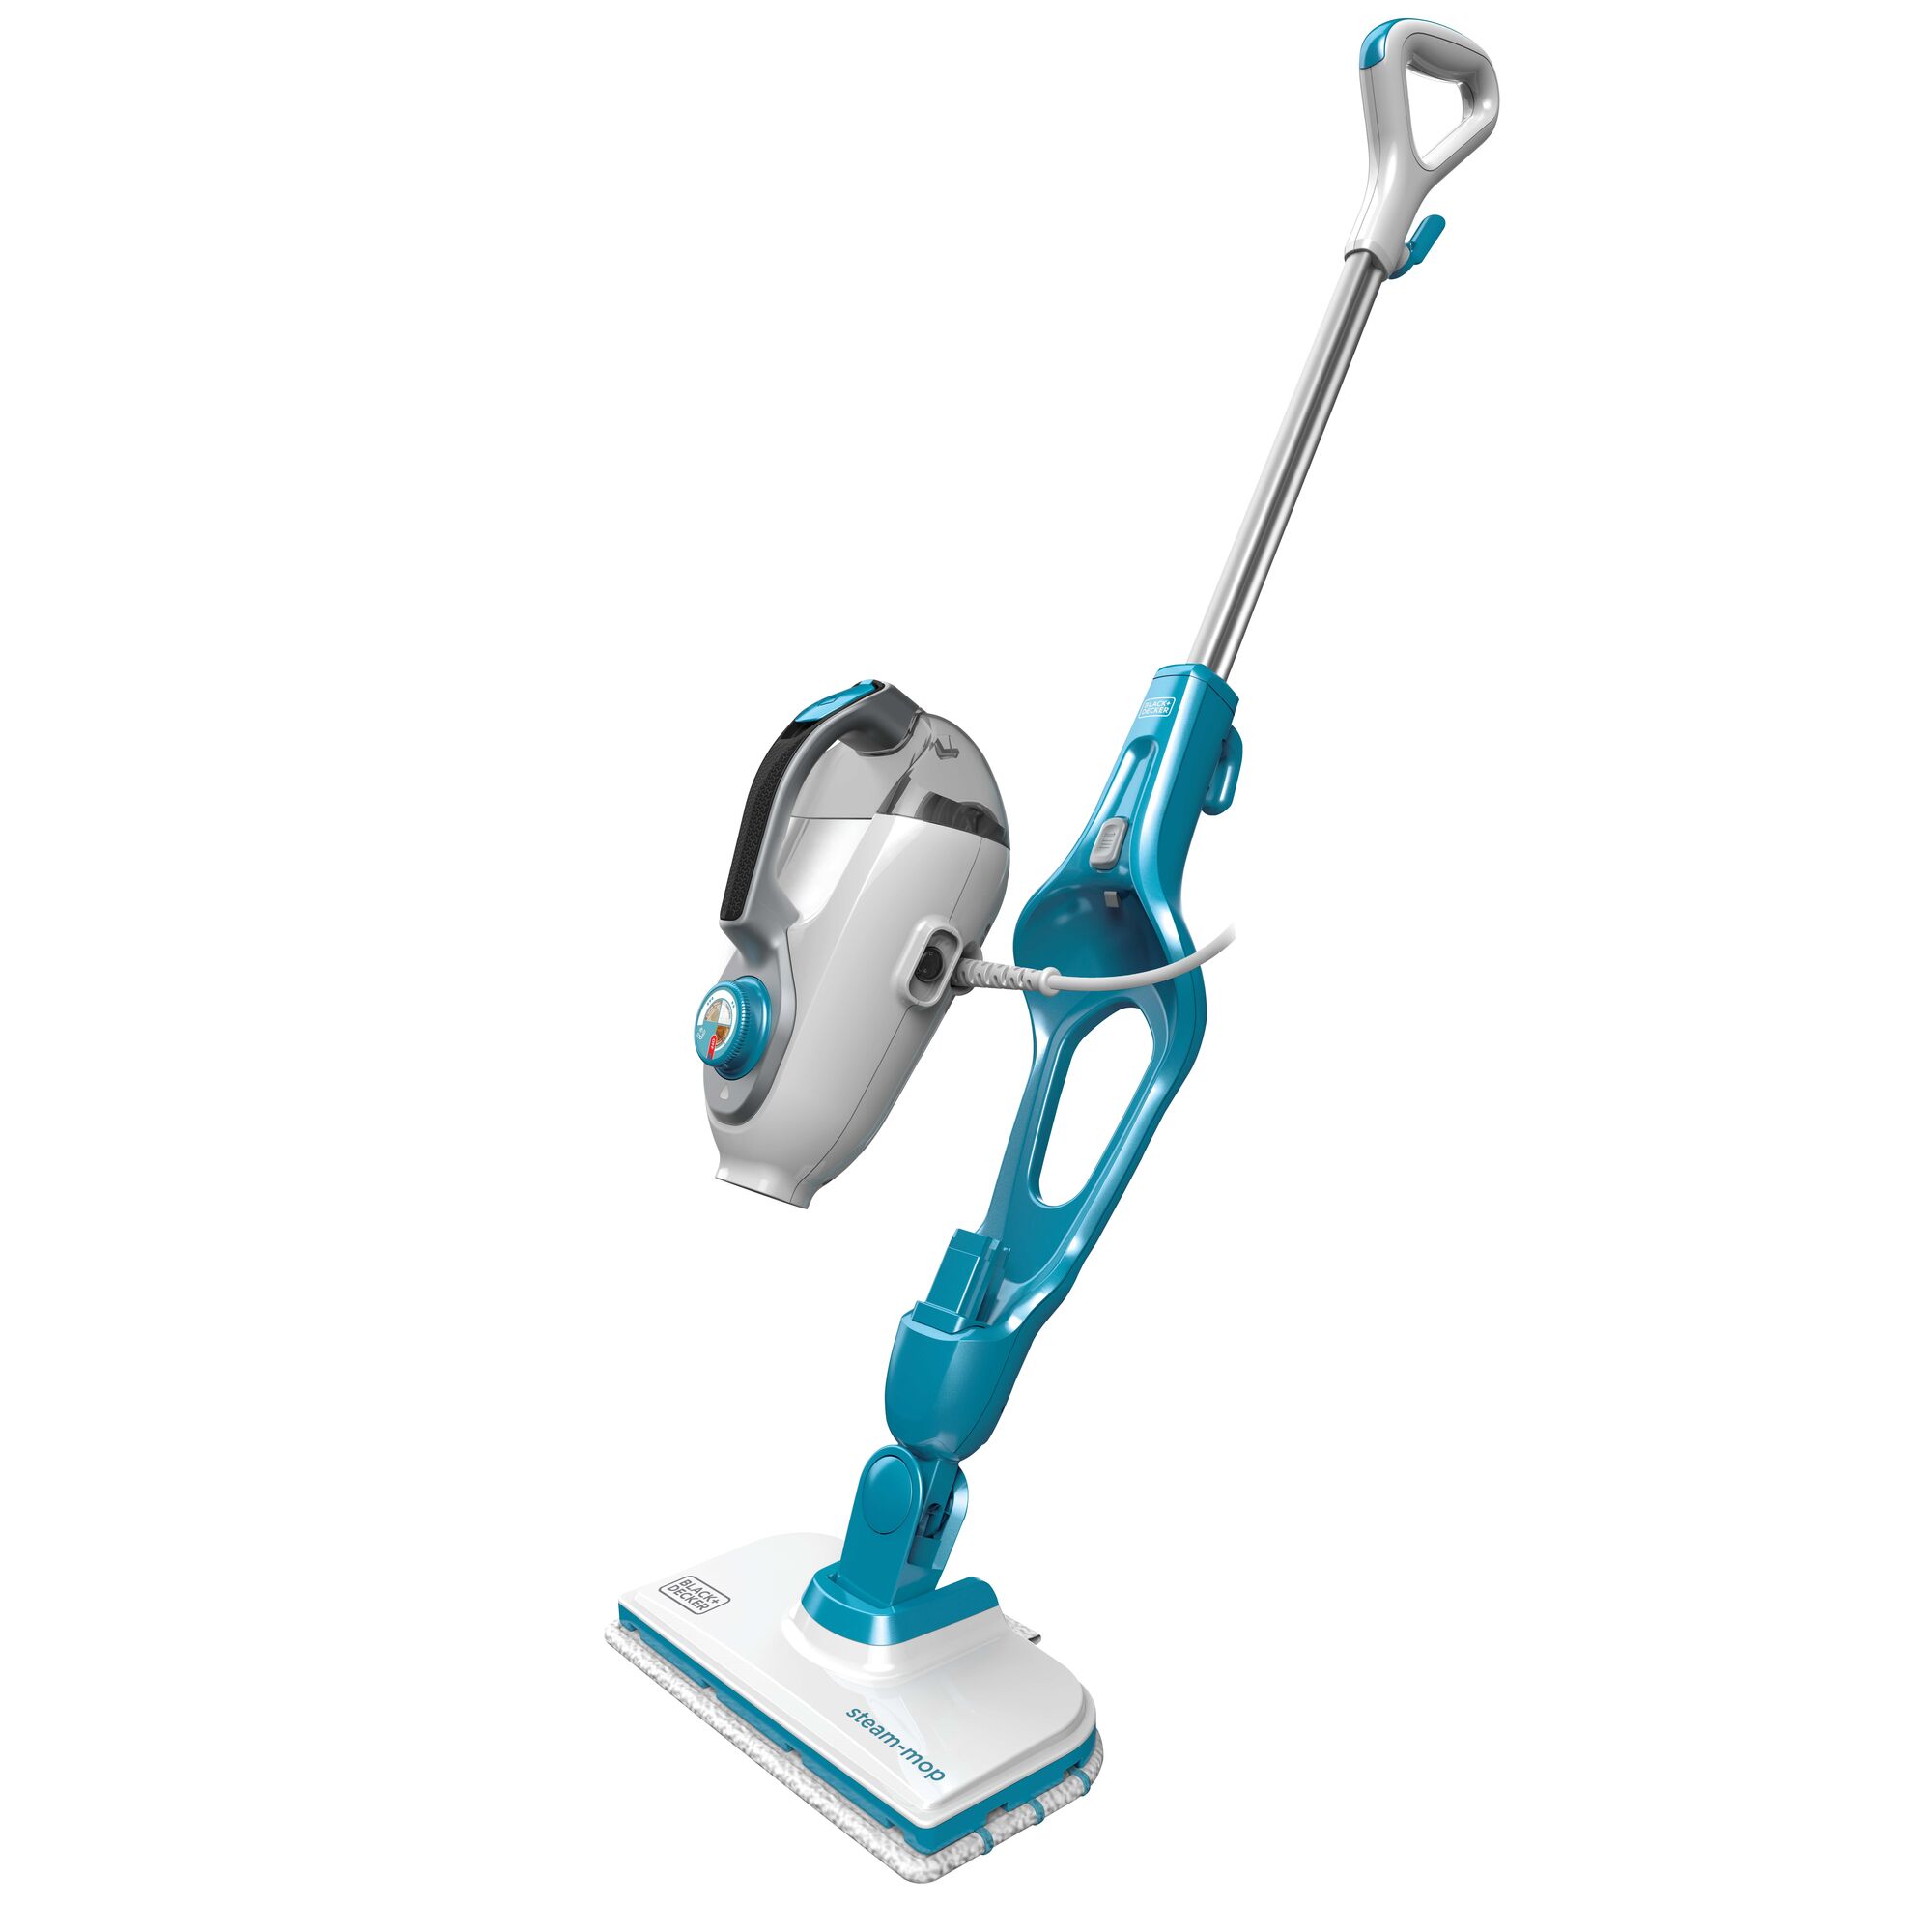 Profile of 5 in 1 Steam Mop and Portable Steamer with handheld part detached.